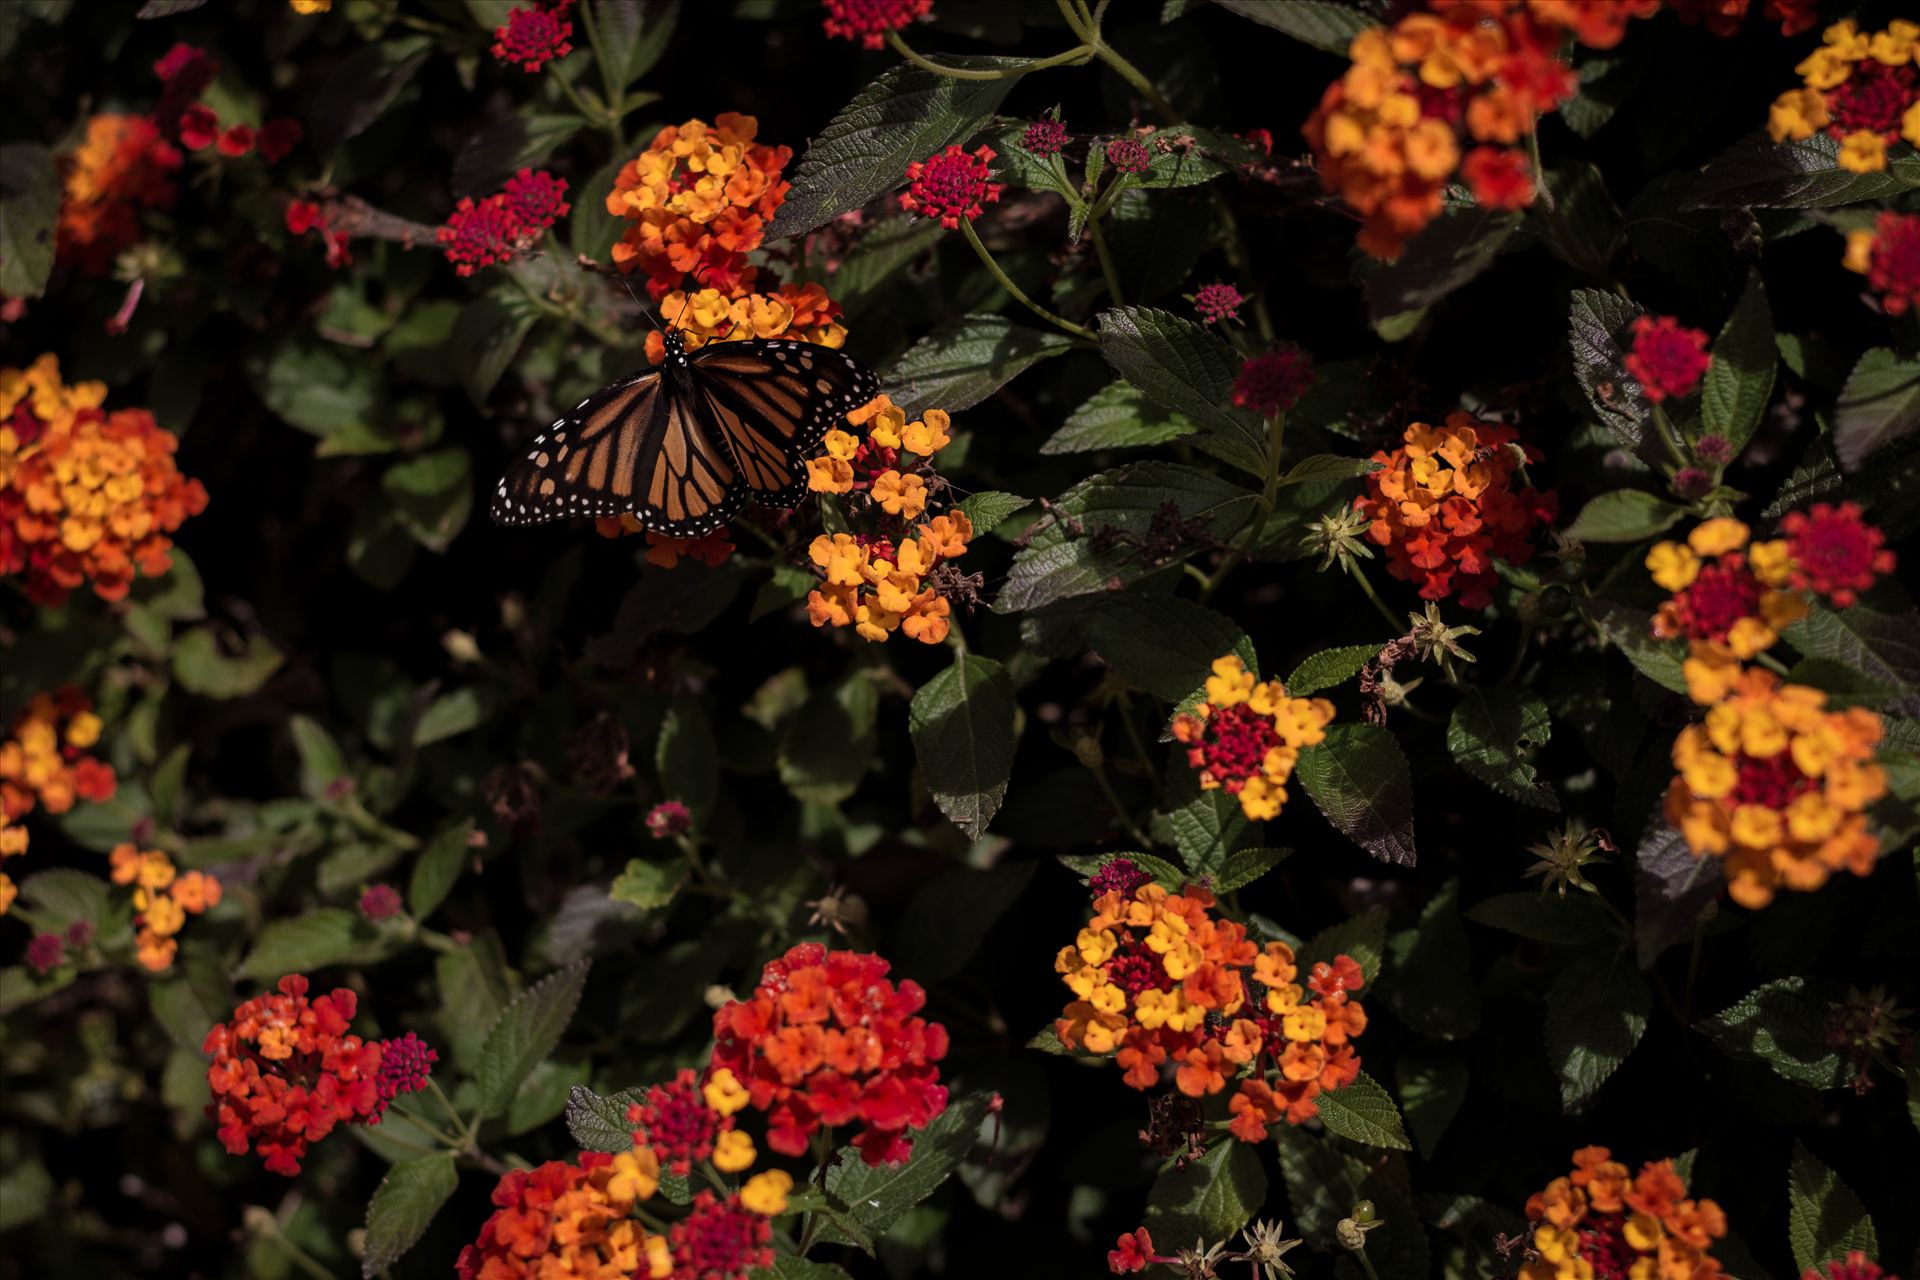 Butterfly Dawn.jpg Monarch butterfly landing on bright flowers on California's Central Coast near Pismo Beach. by Sarah Williams